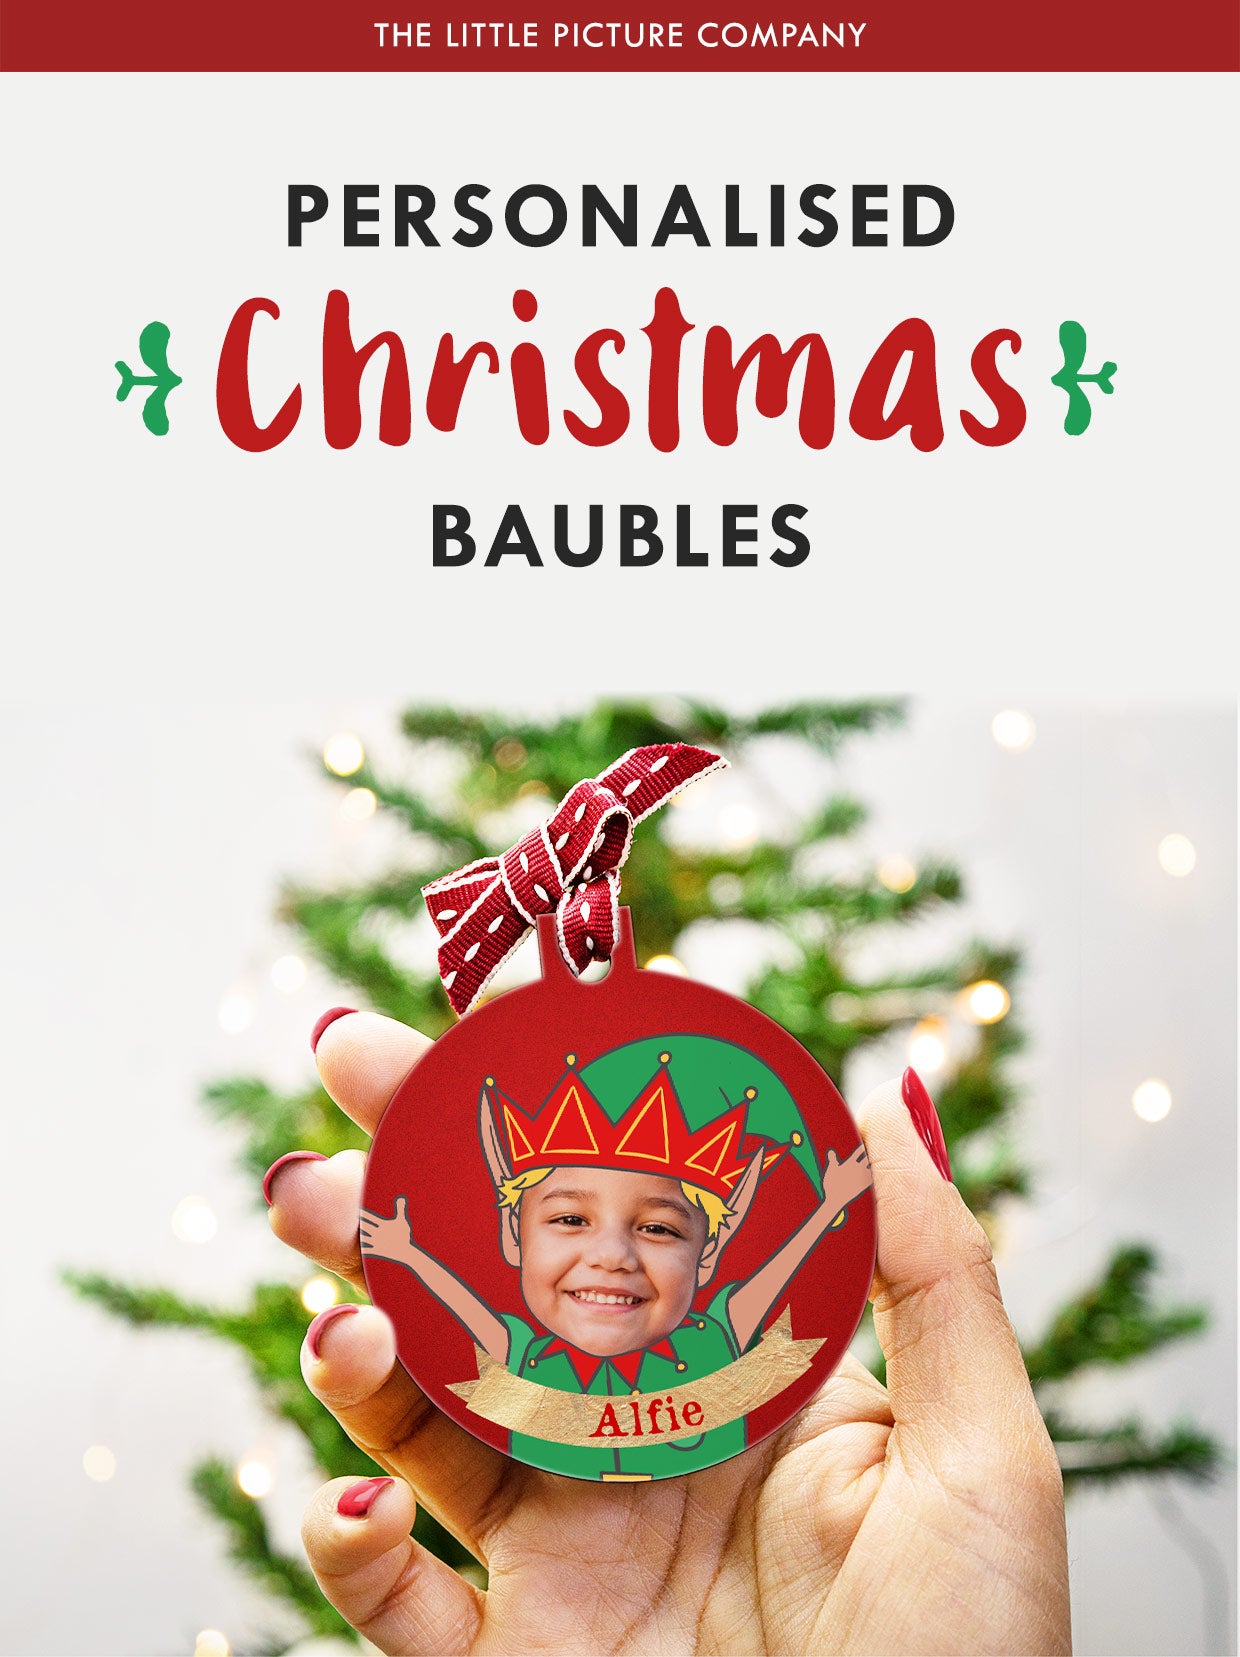 Unique Personalised Christmas Baubles with photos